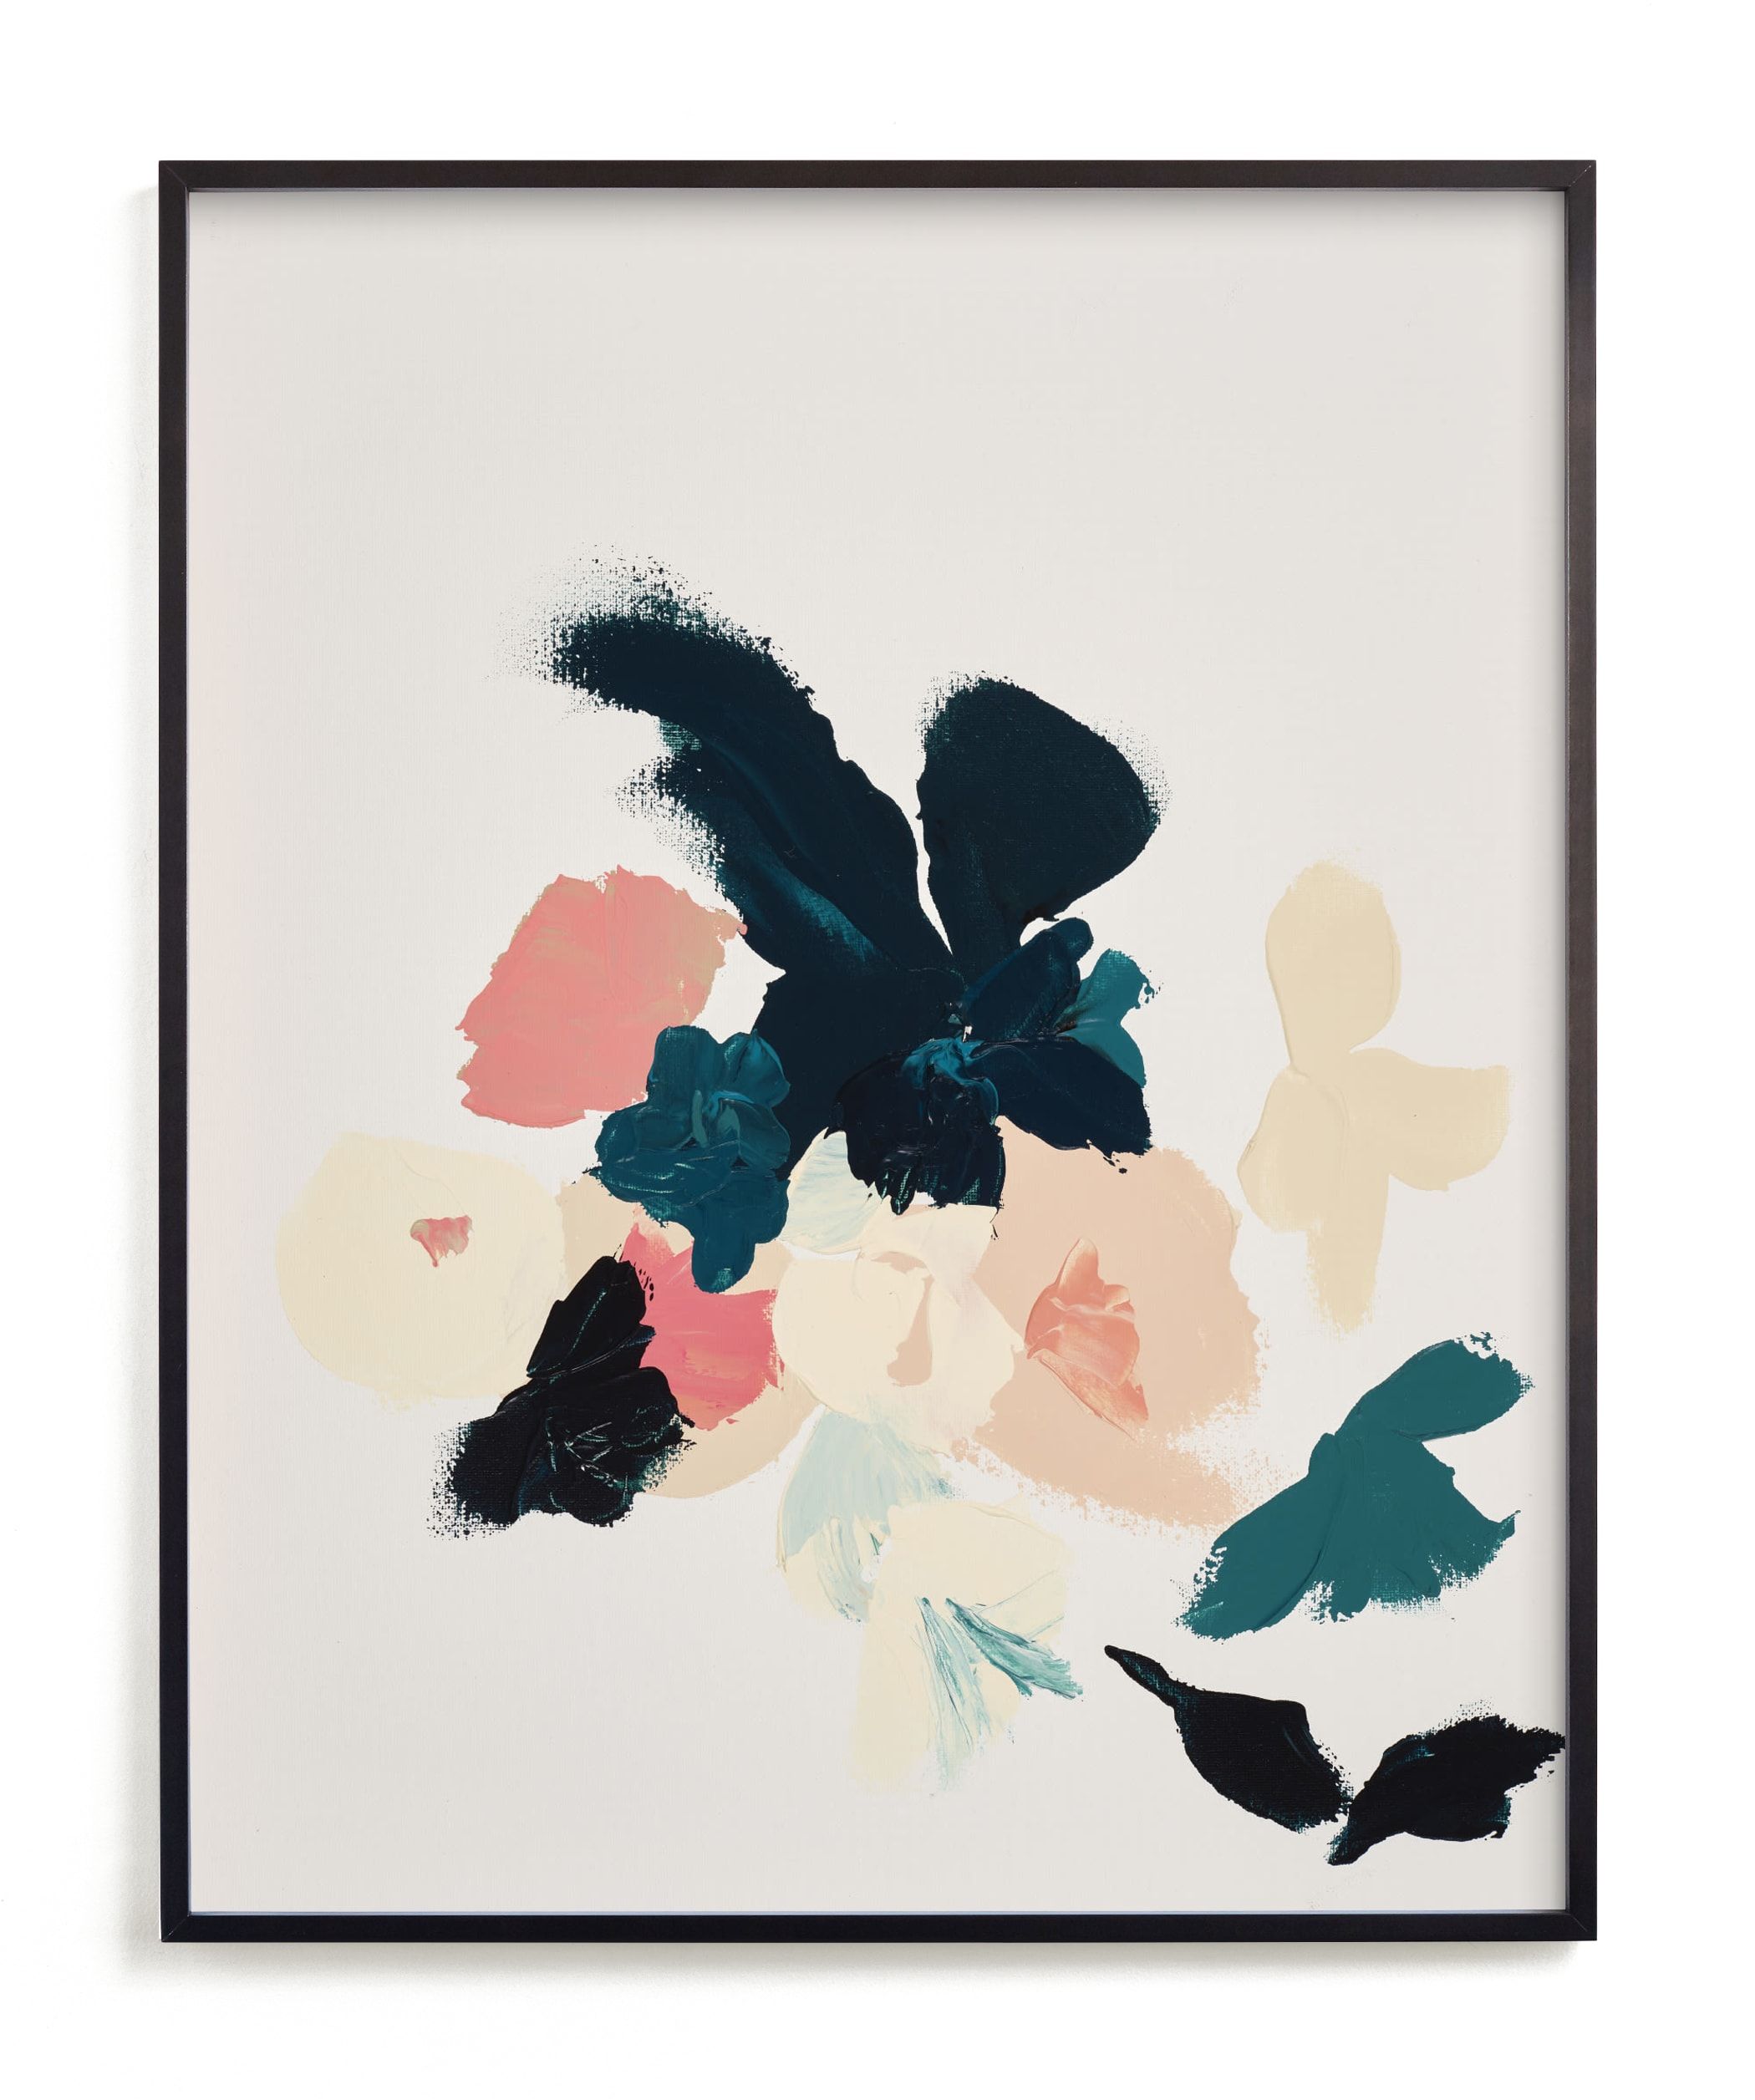 "Abstract Botanical Floral" - Painting Limited Edition Art Print by Caryn Owen. | Minted